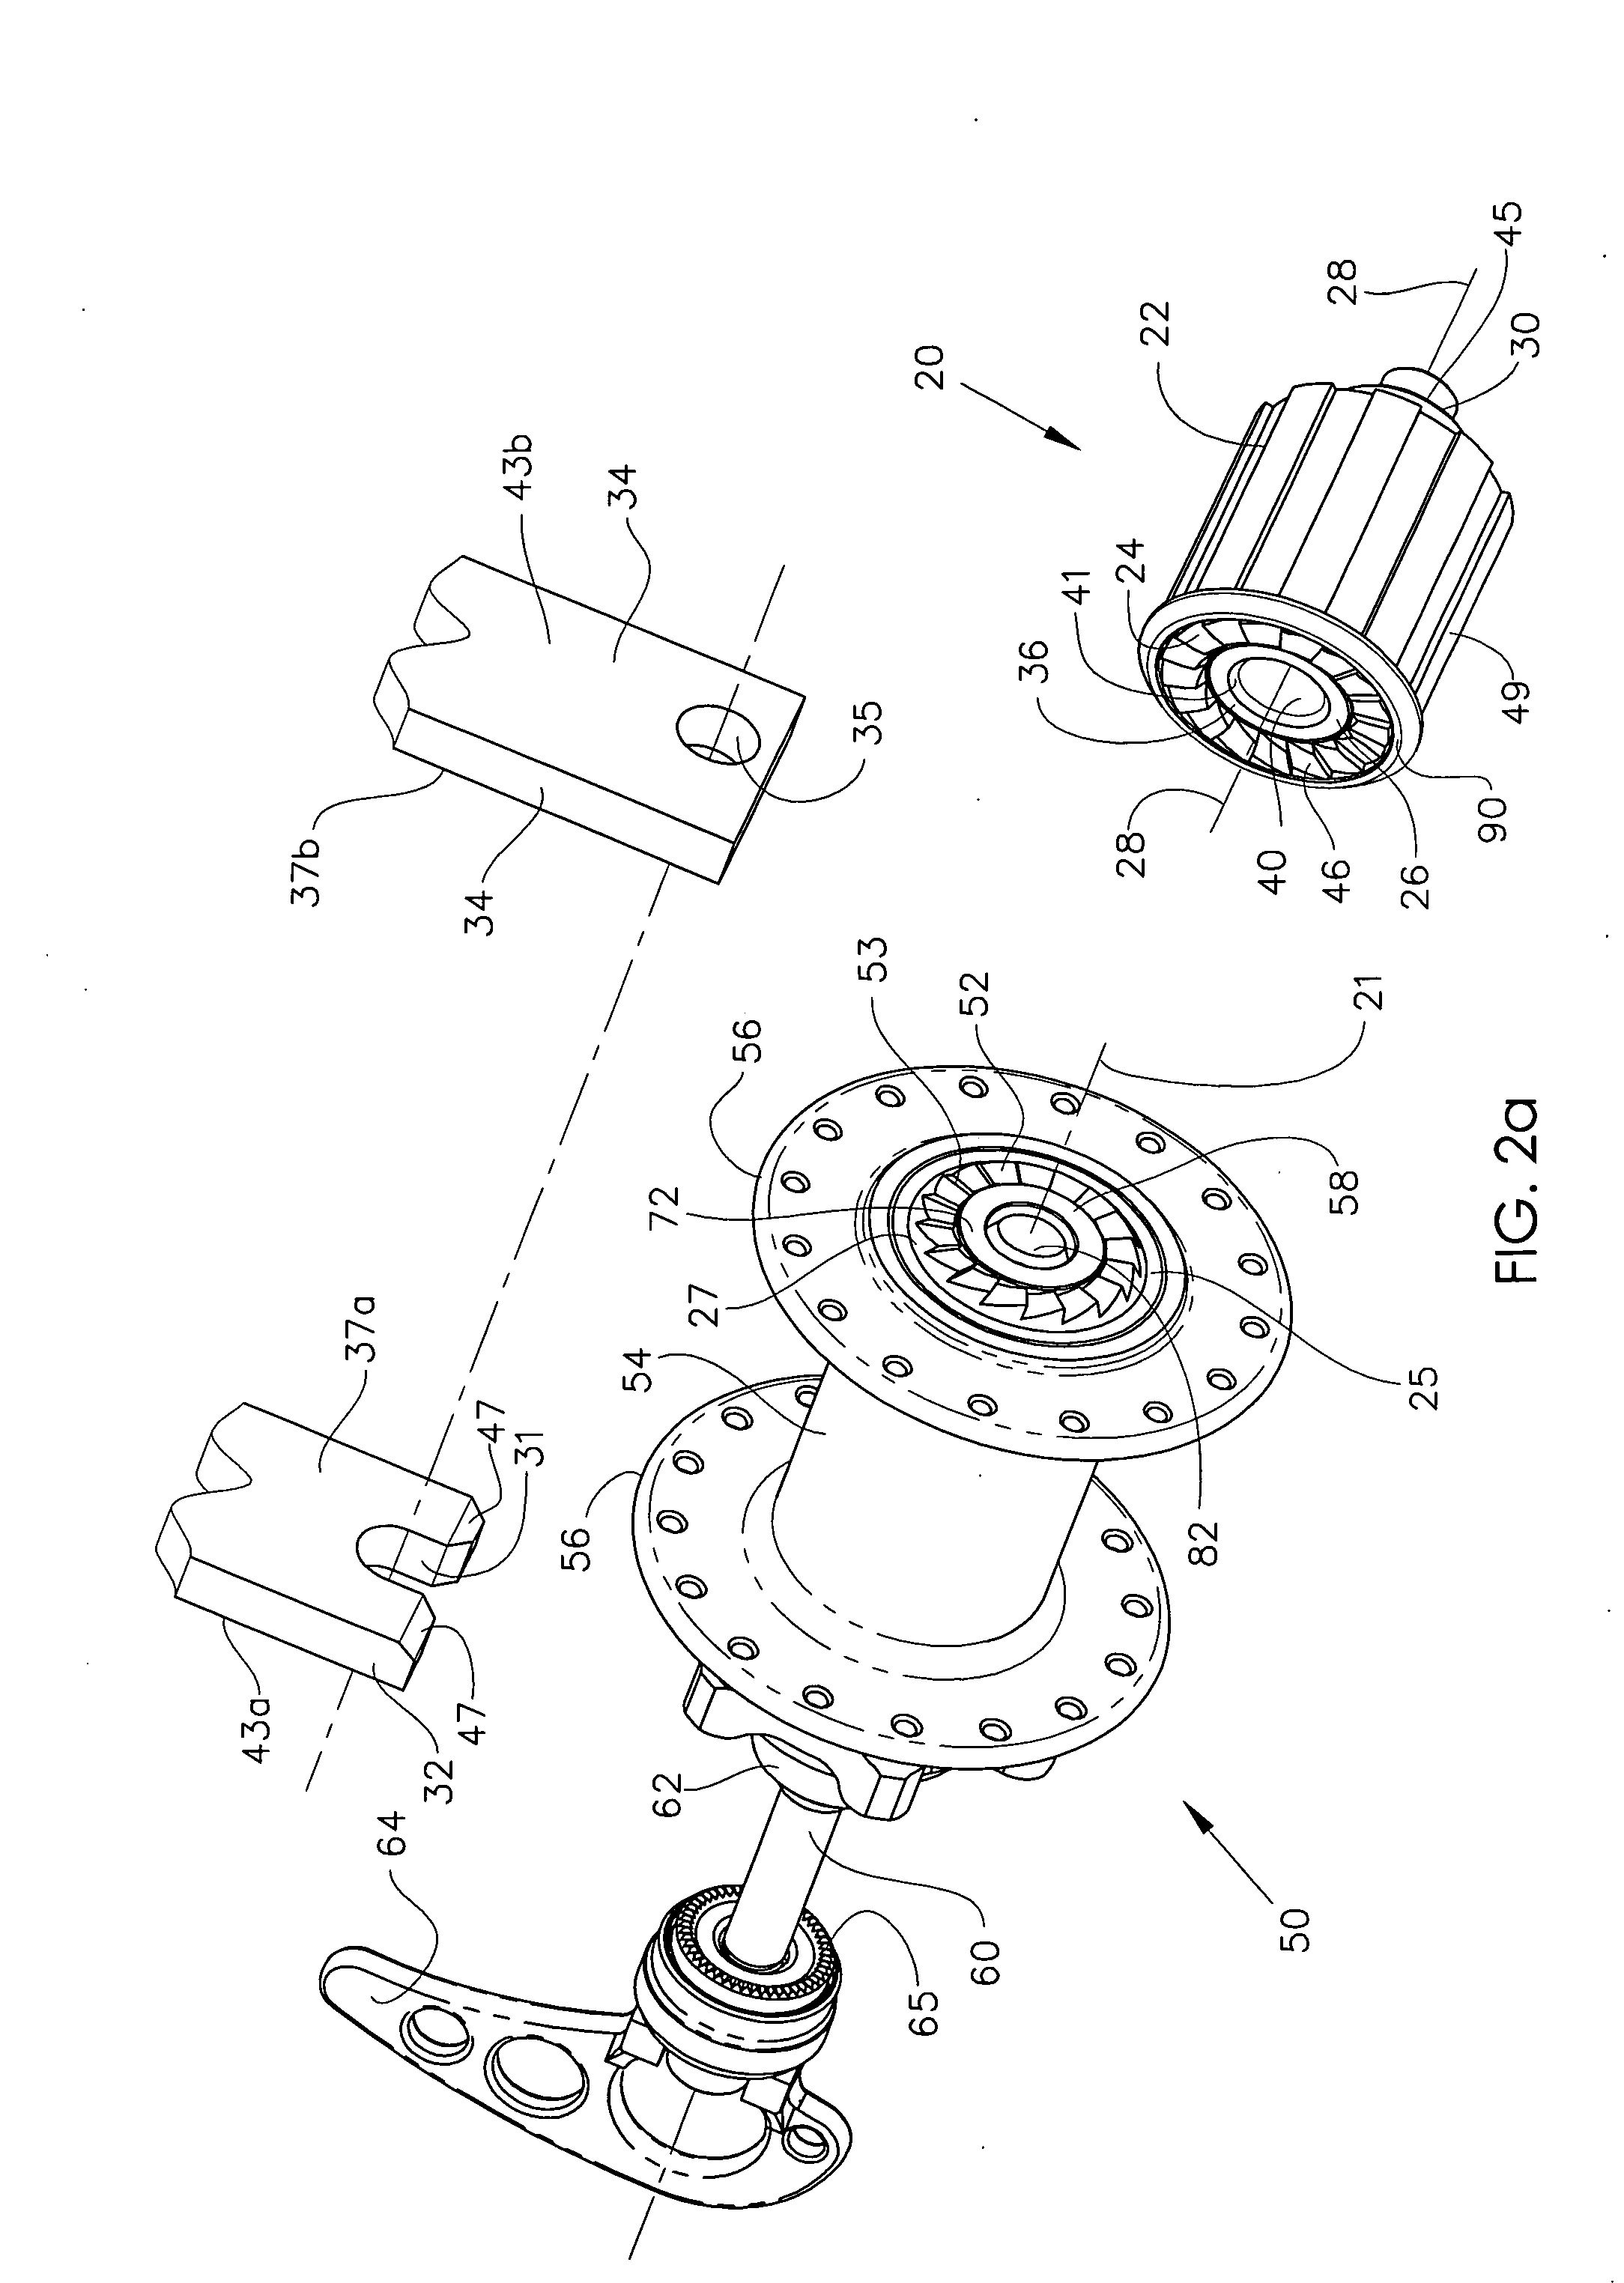 Torque coupling assembly